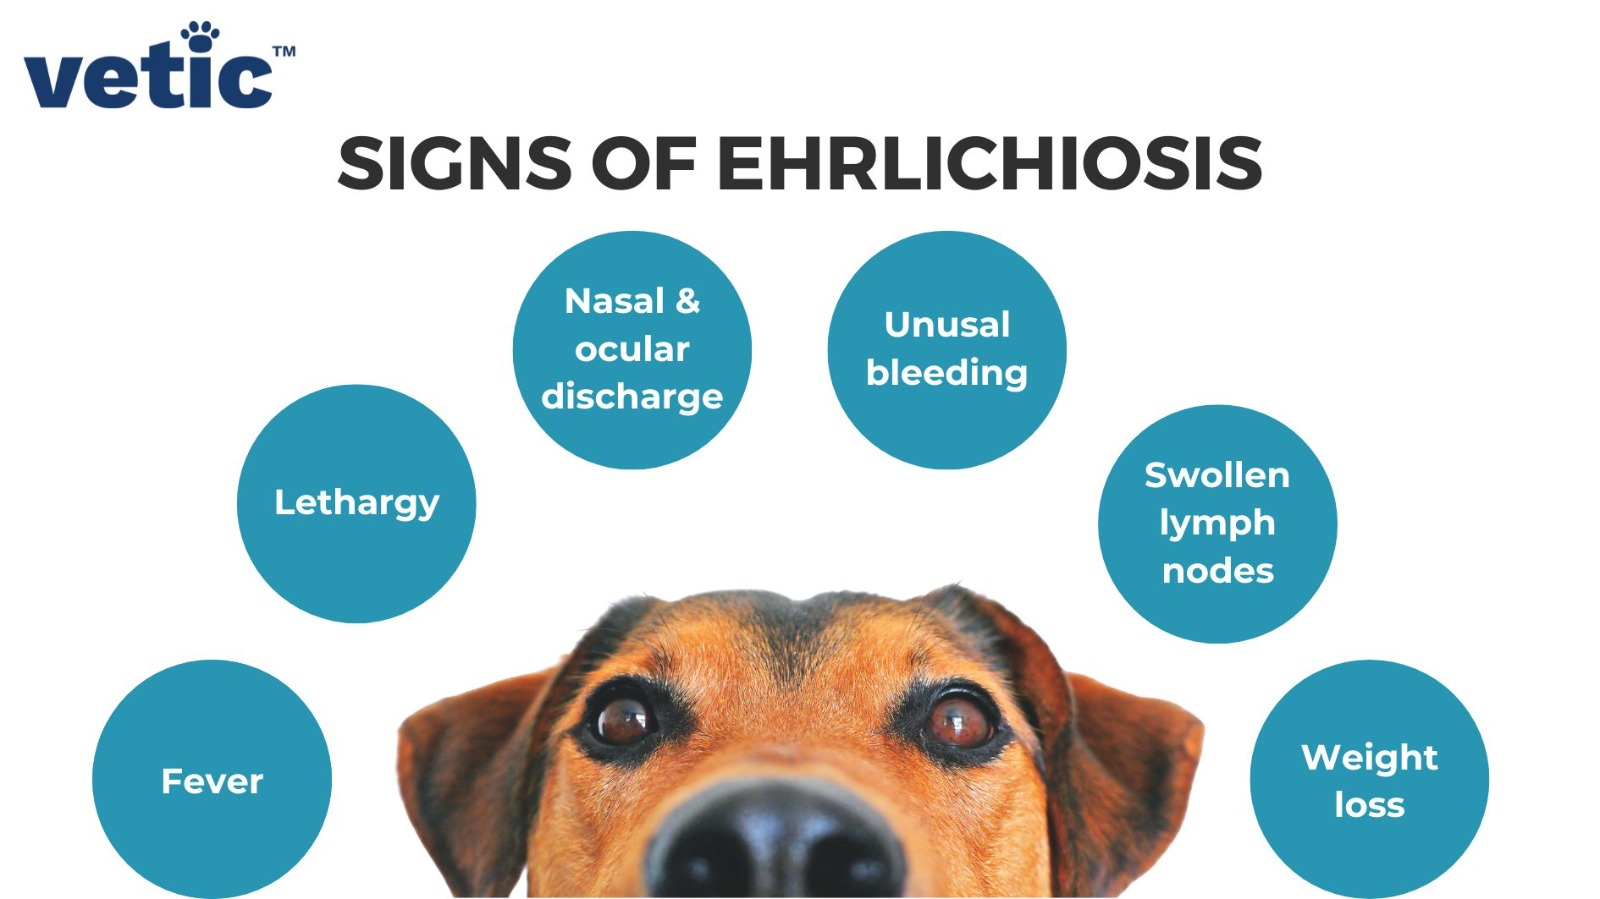 Infographic that says Signs of Ehrlichiosis which is a type of tick fever in dogs caused by Ehrlichia bacteria. the signs include weight loss, swollen lymph nodes, unusual bleeding, nasal and eye discharge, lethargy and fever.